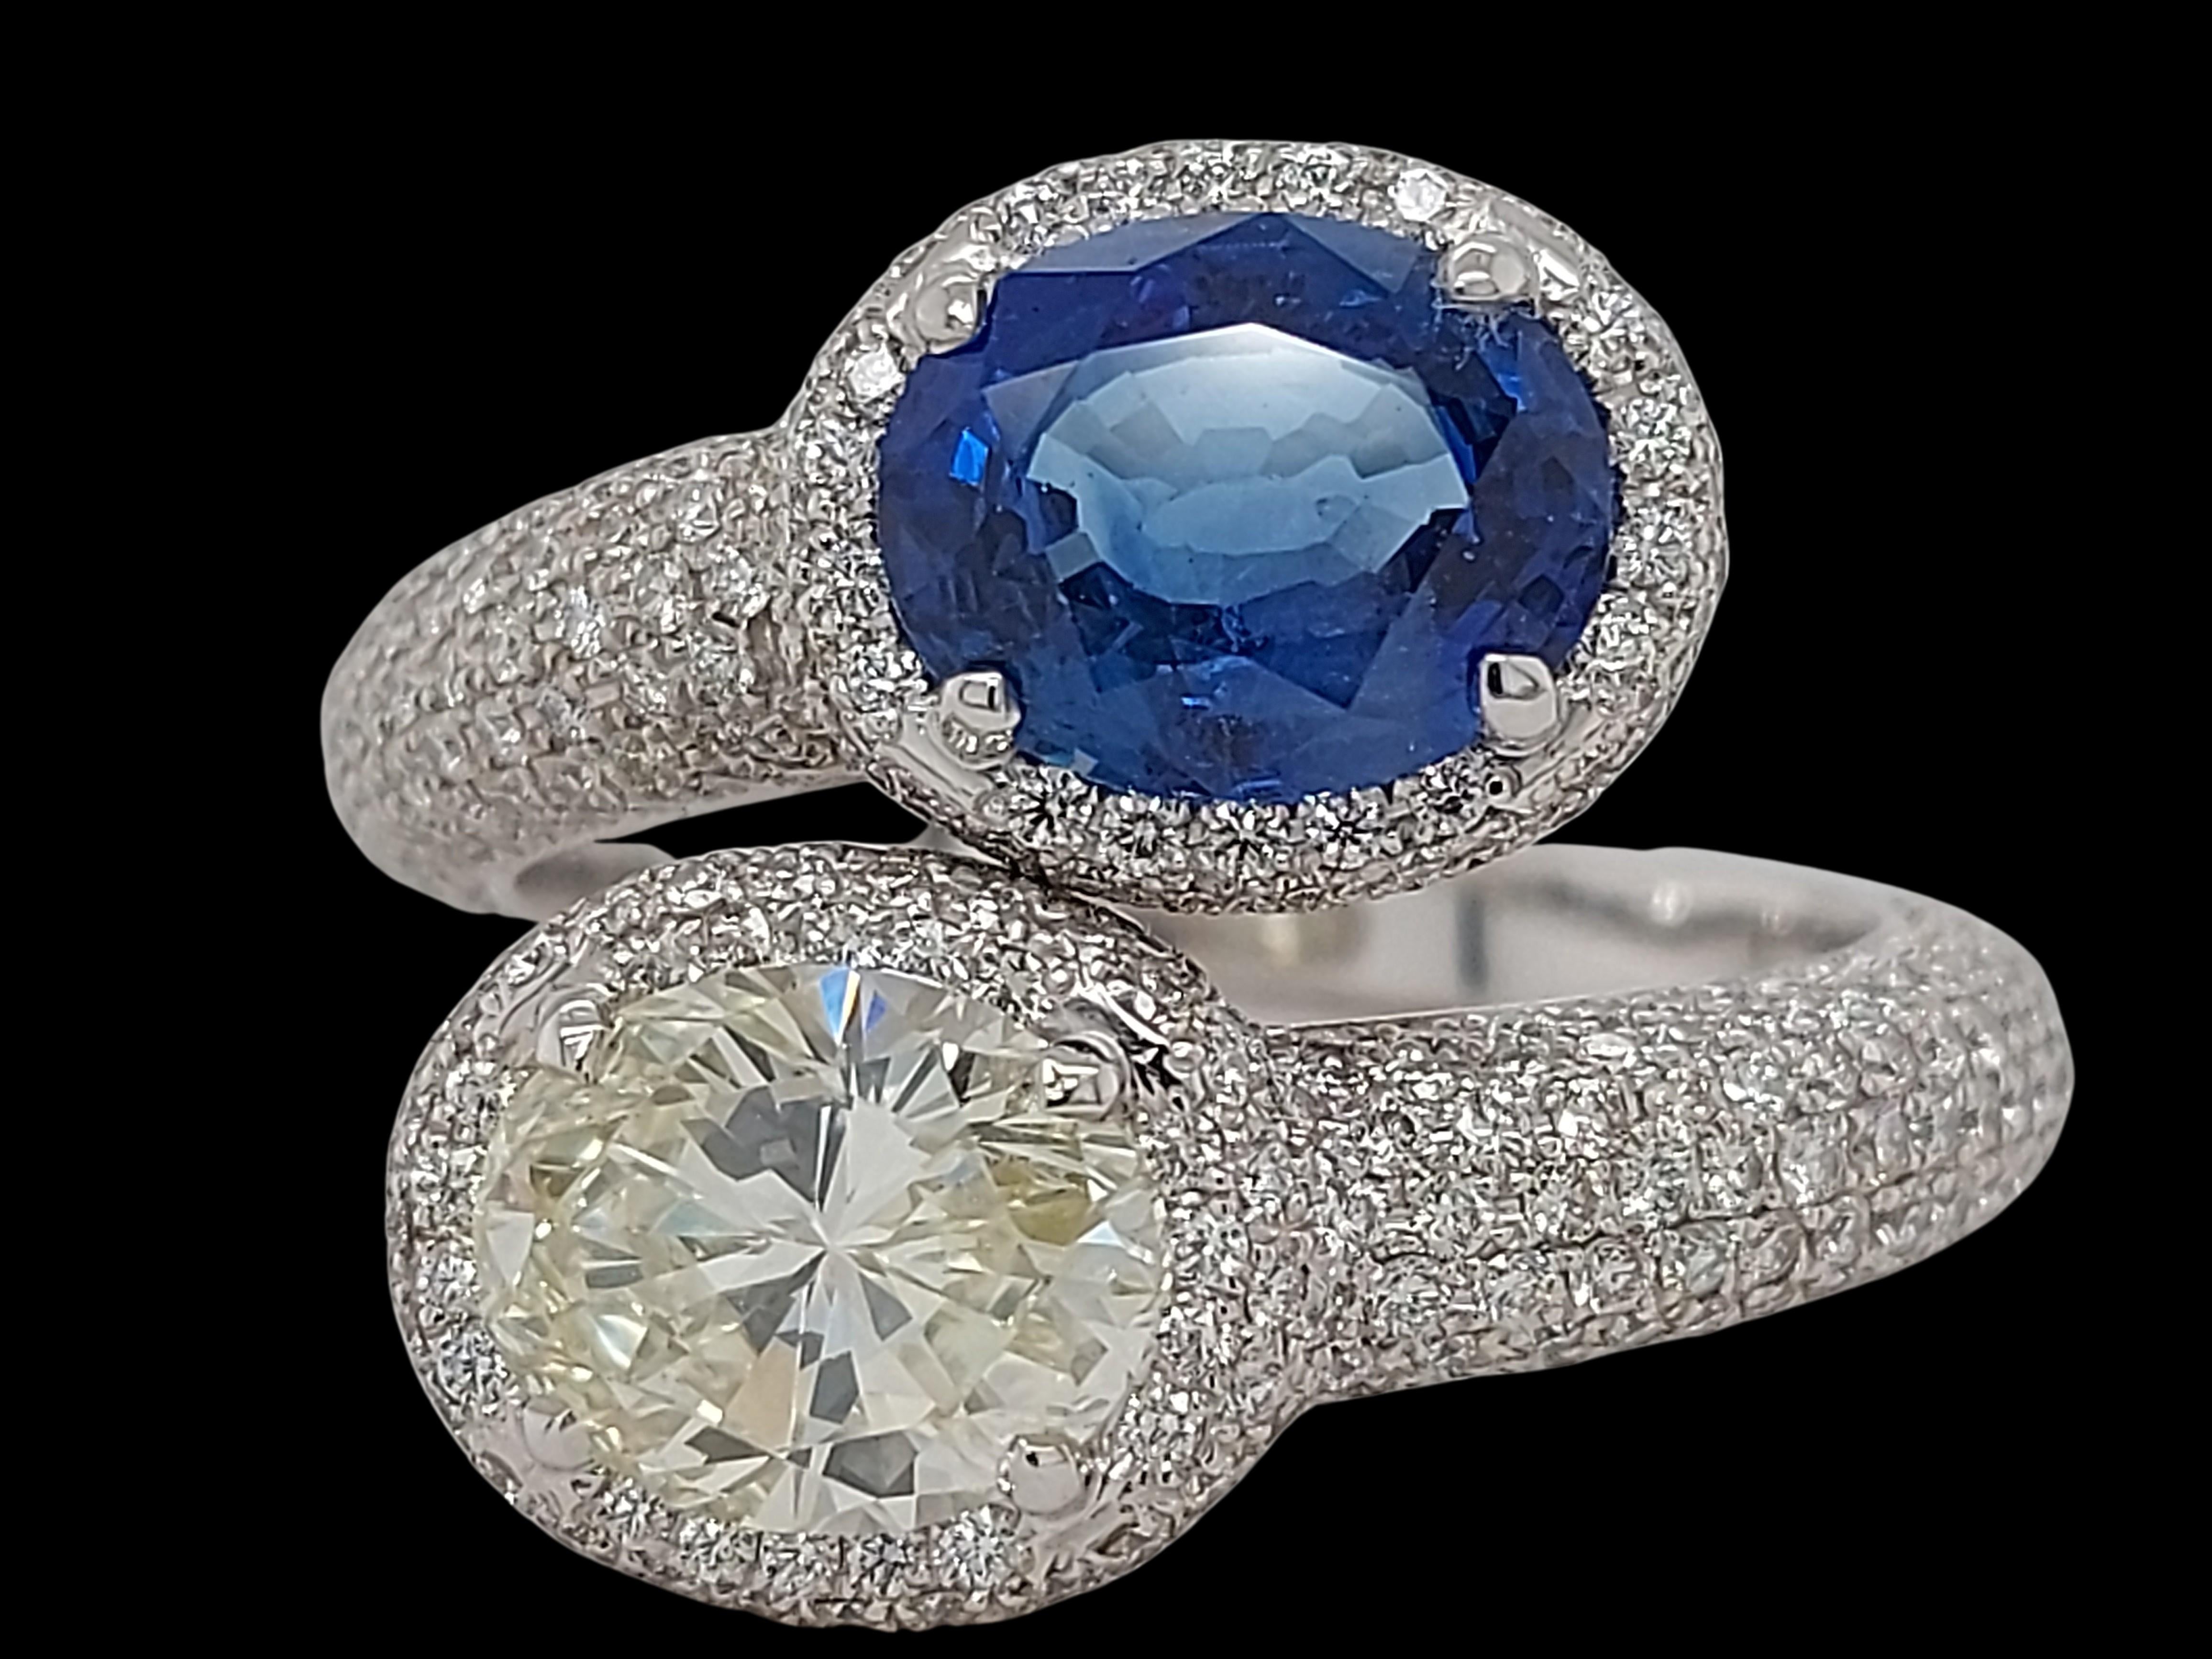 Stunning Toi et Moi 18kt White Gold Ring with a 2.63 Carat Sapphire, 1.67 Carat  For Sale 3